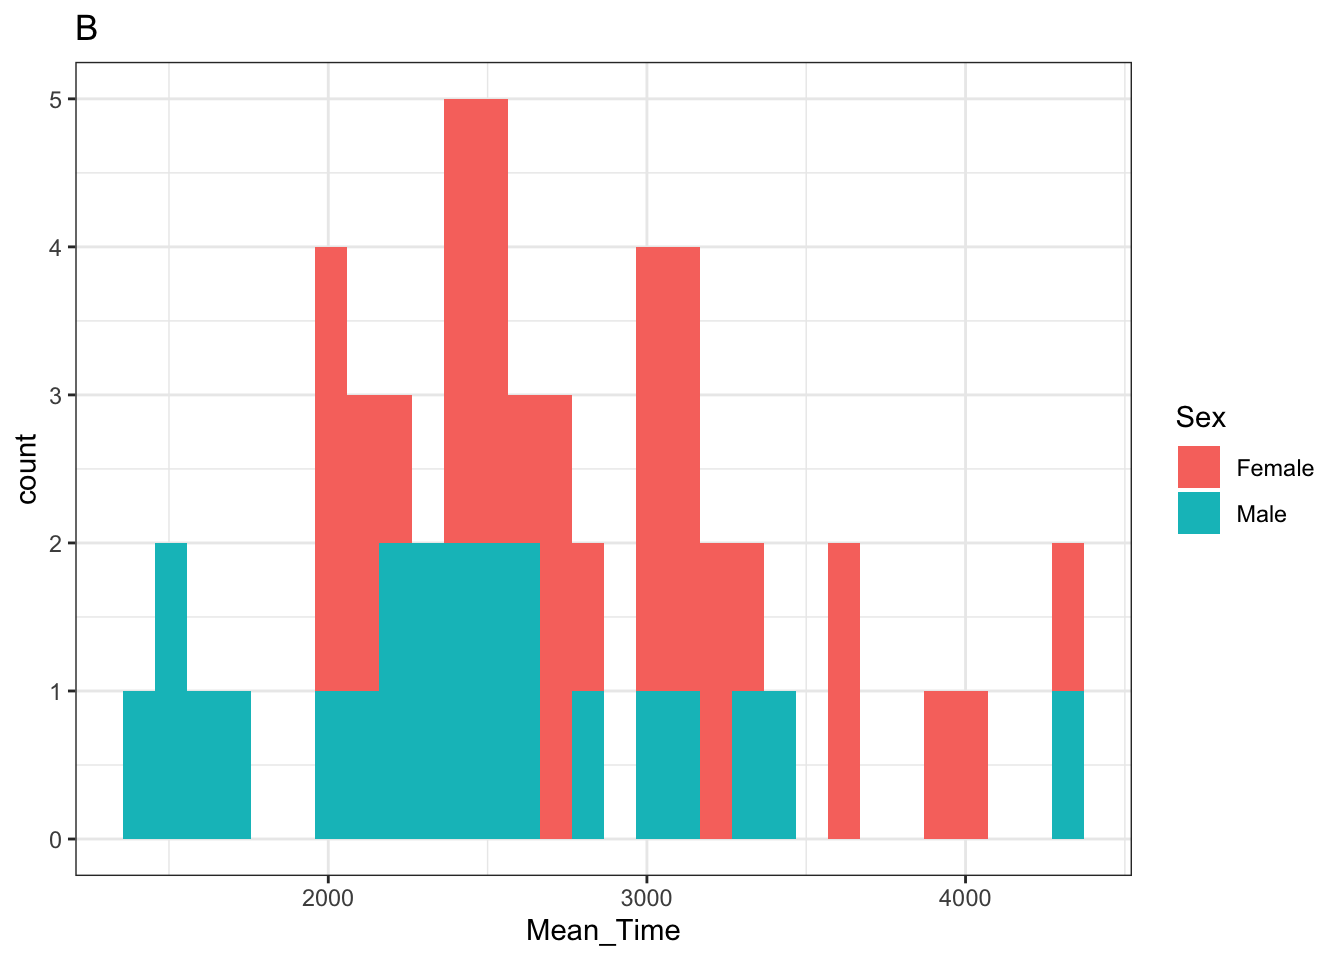 A histogram of distribution of Mean Time counts by Sex